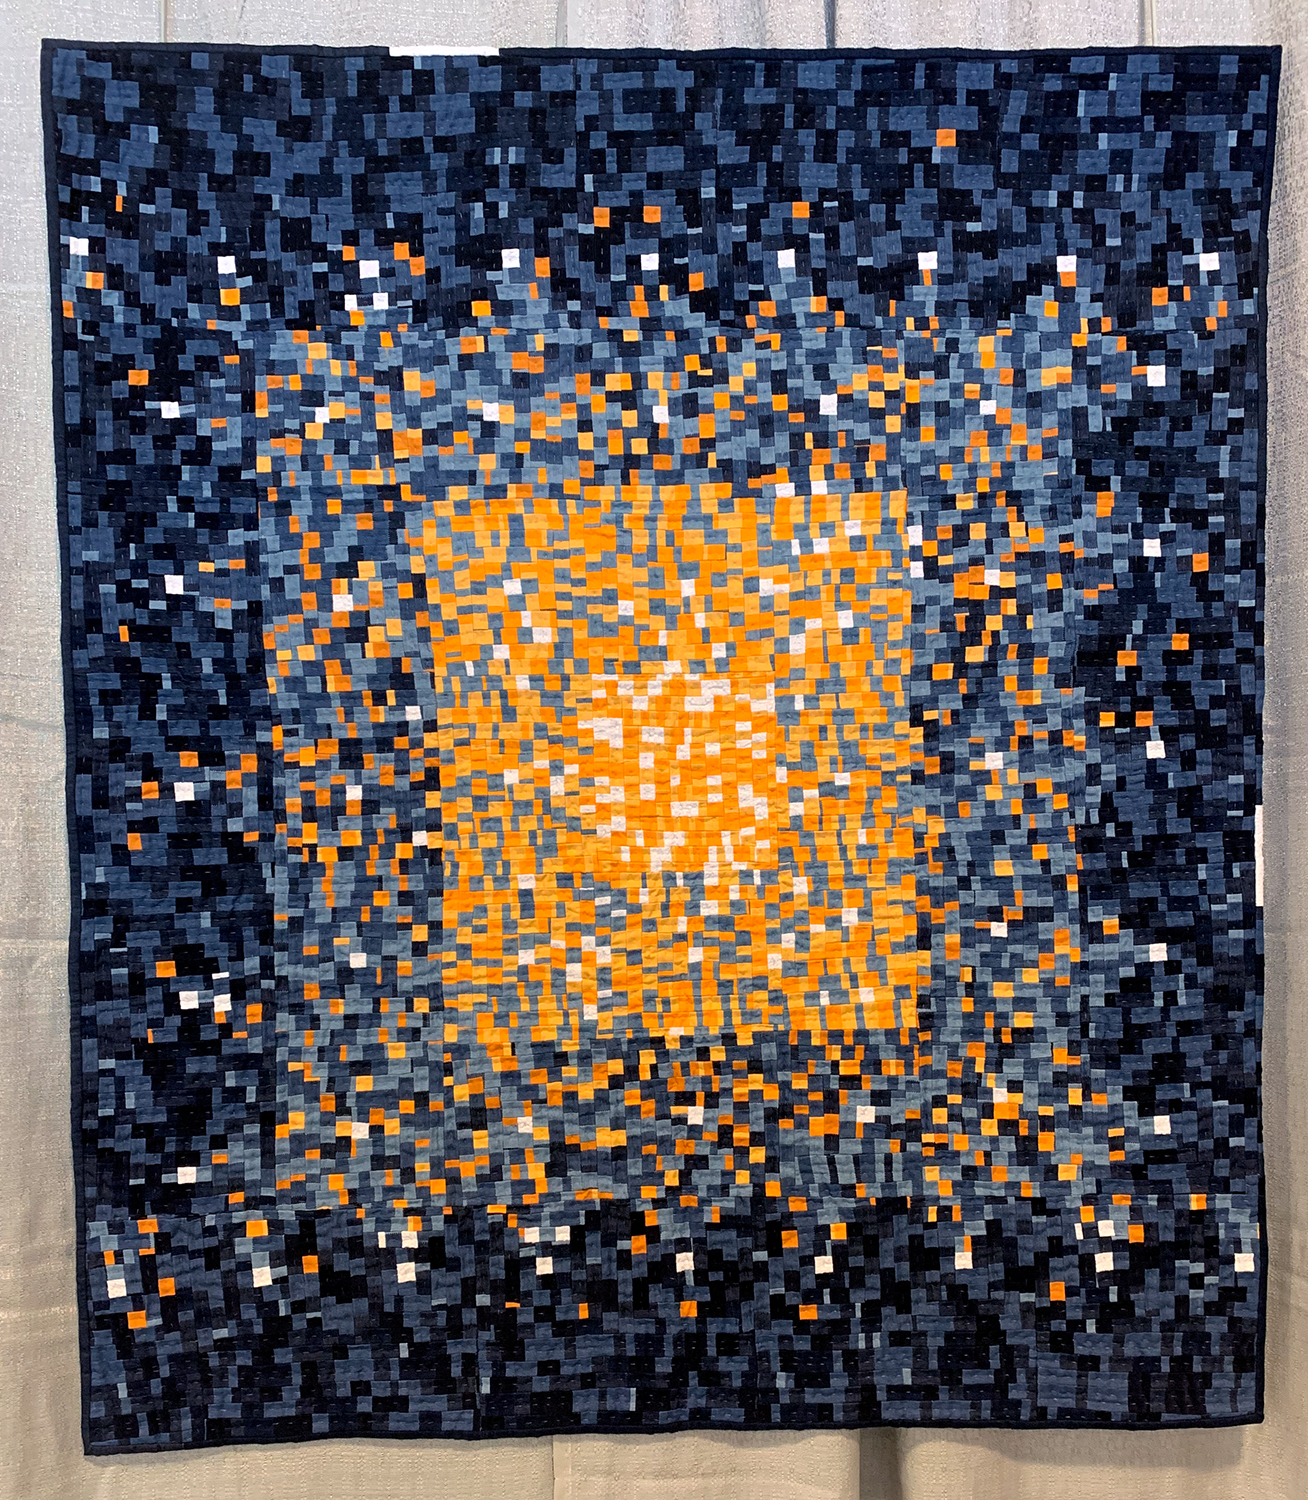 an improvisational quilt with orange and blue colors.